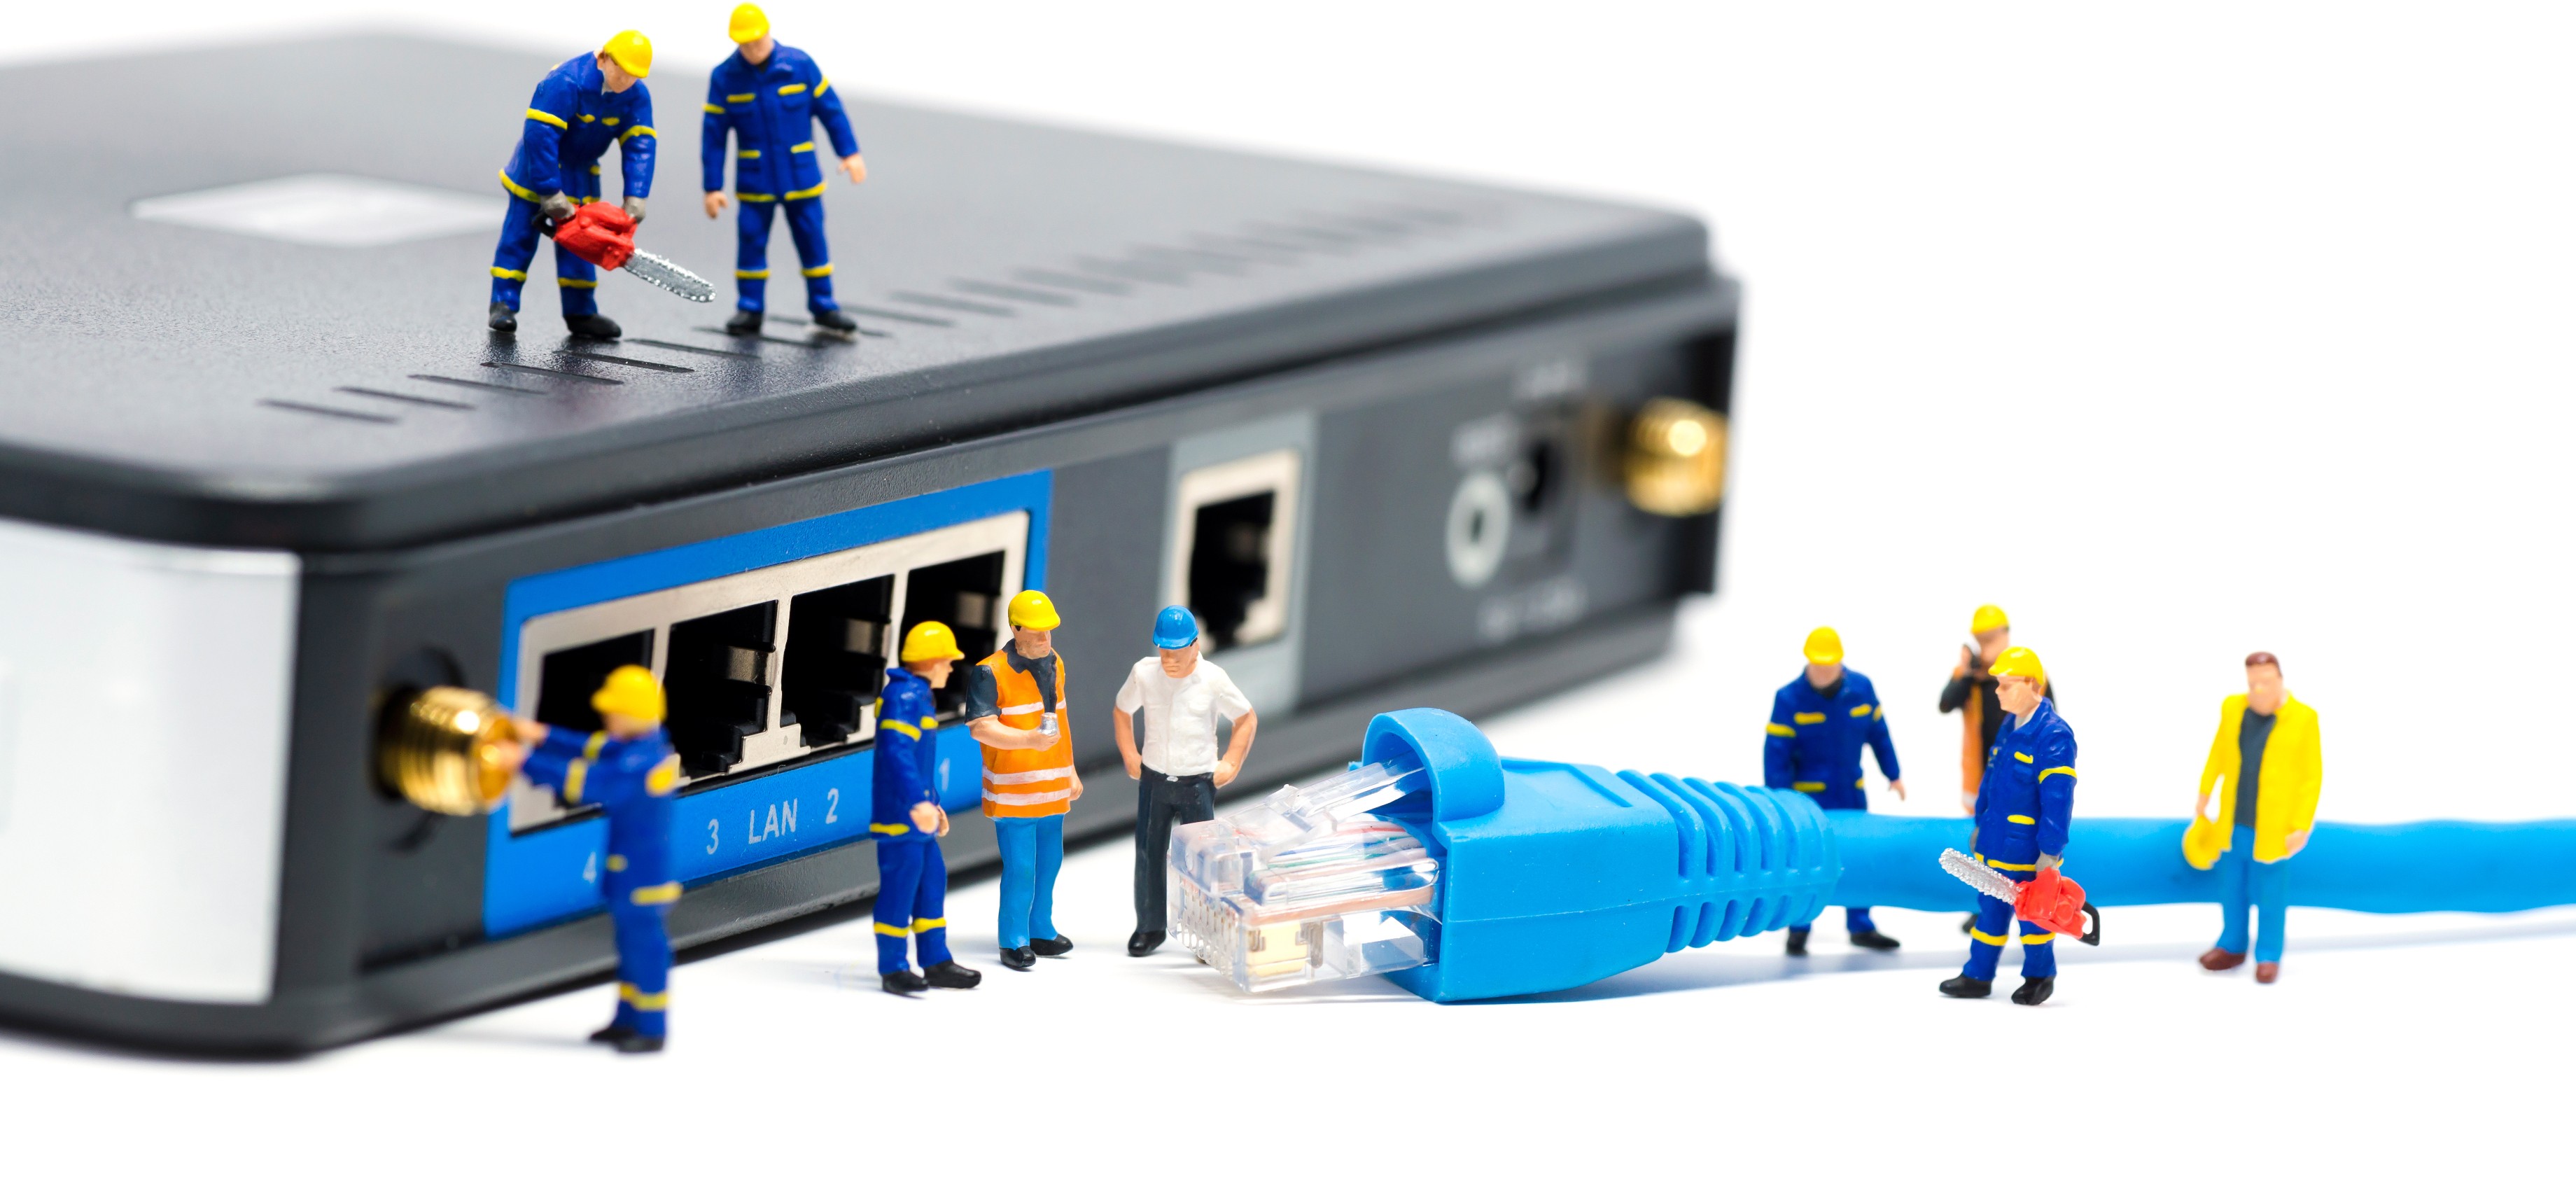 Technology Doll Cable Network Ethernet Humor 3680x1704